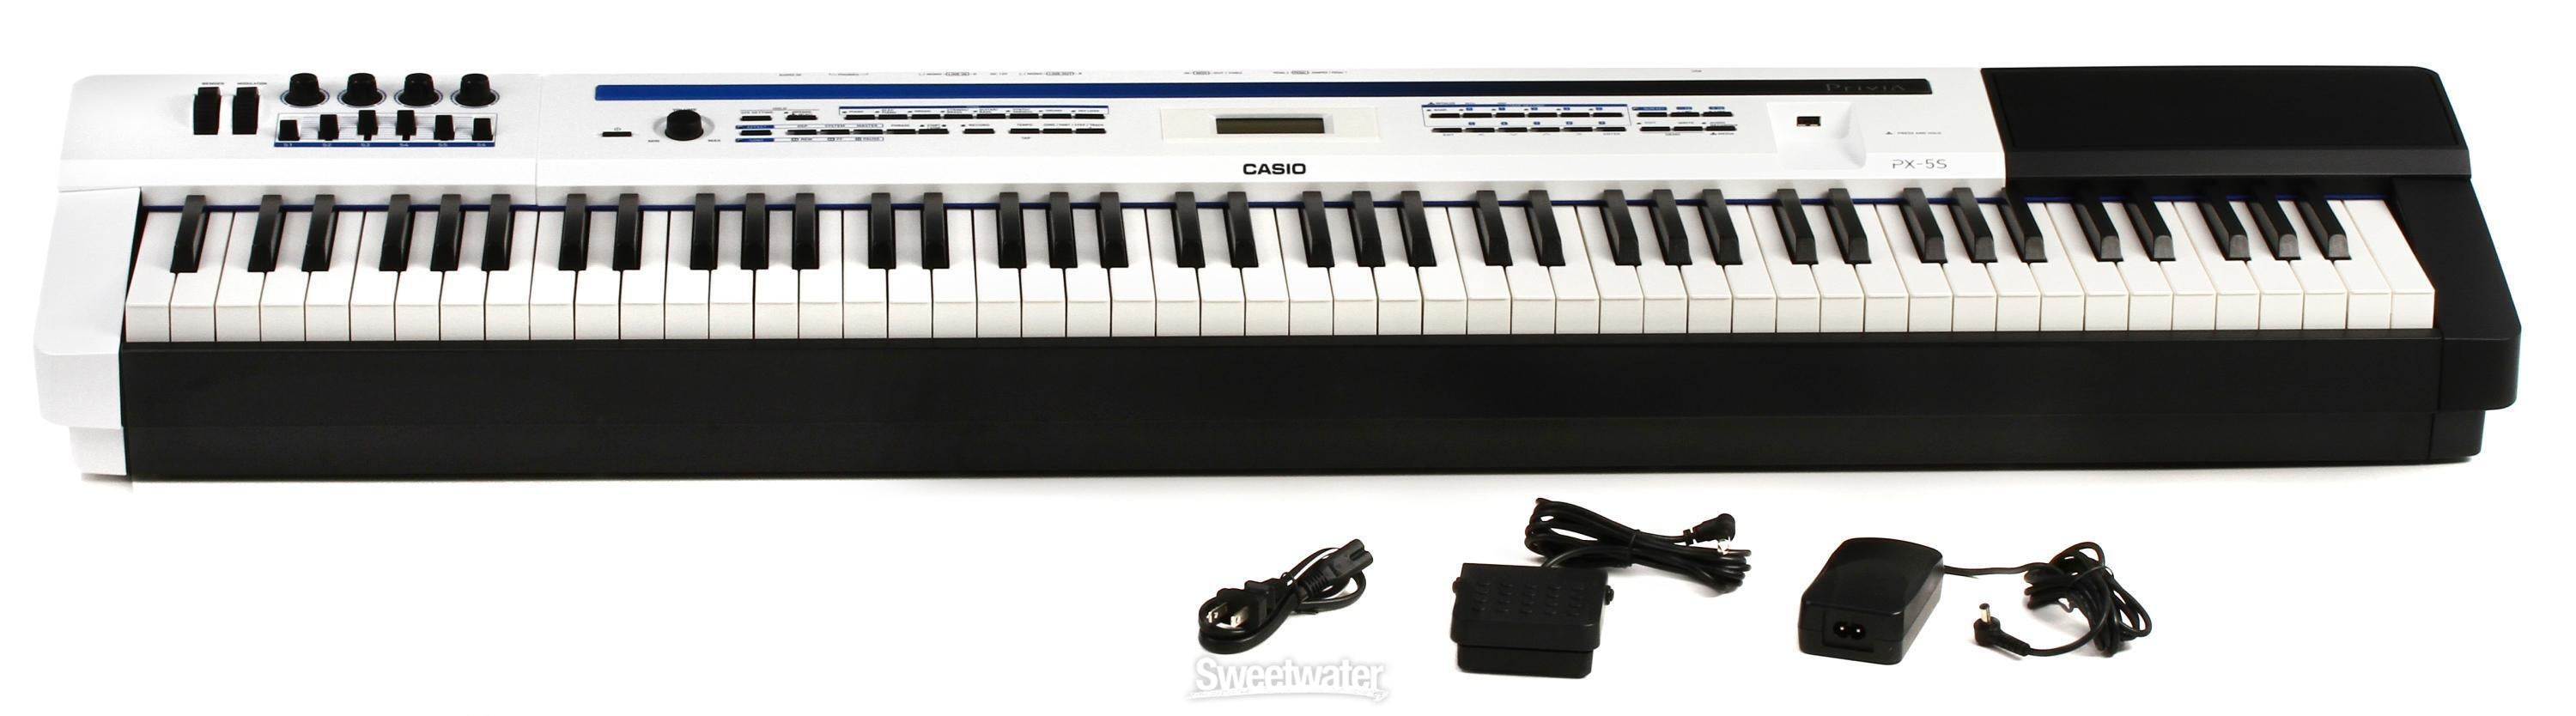 Casio Privia PX-5S 88-key Stage Piano | Sweetwater